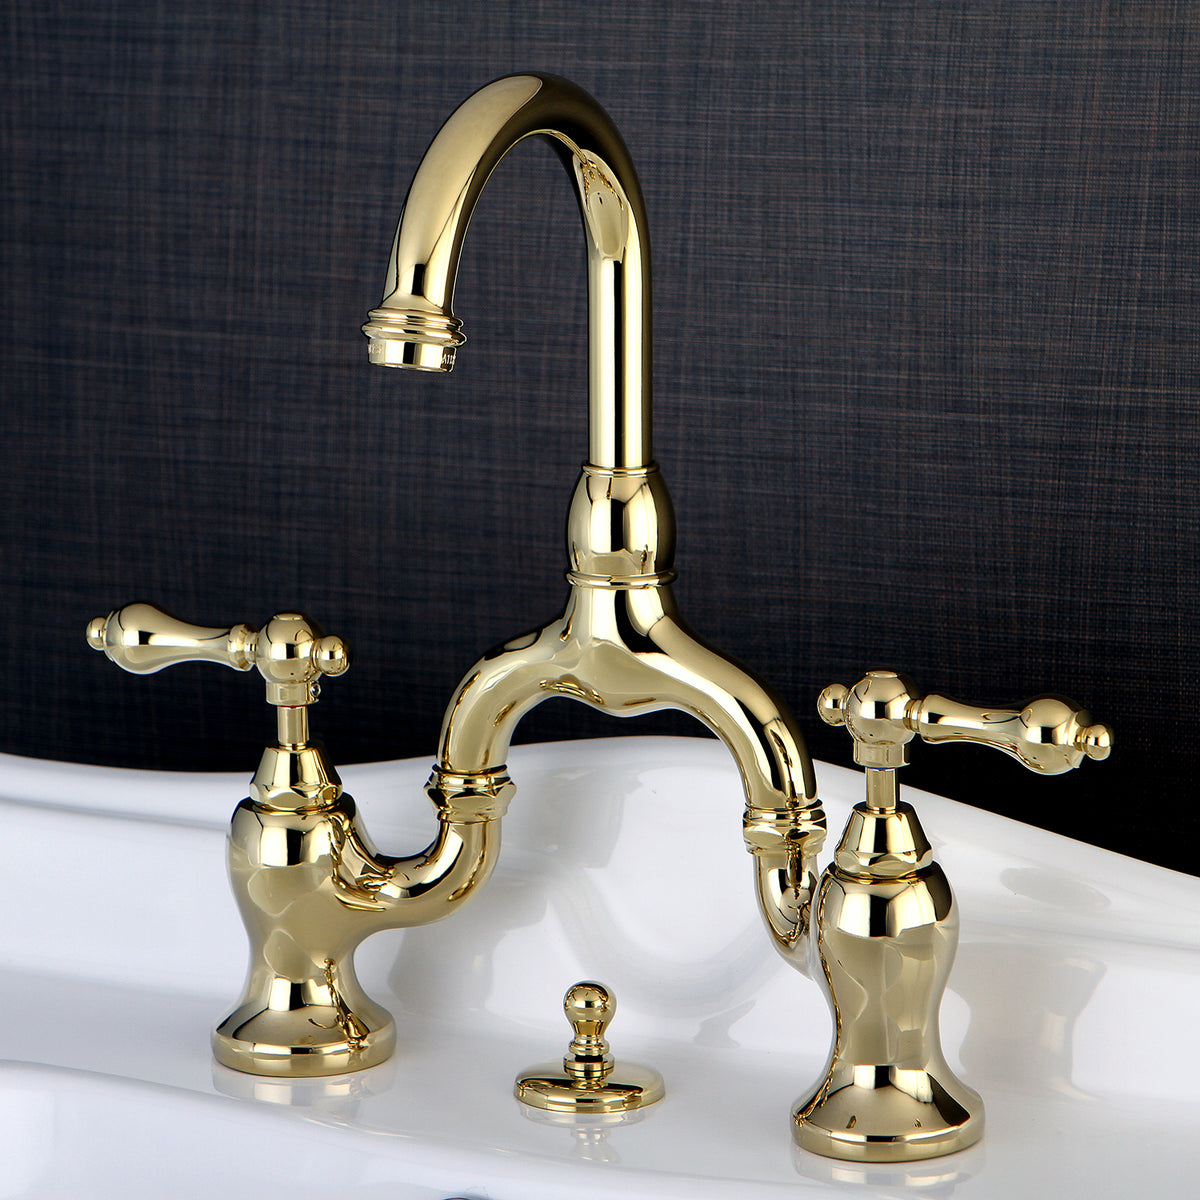 Bronze-　Oil　Country　with　Drain＆#44;　KS7995AL　Faucet　Pop-Up　Brass　Lavatory　English　Kingston　Rubbed